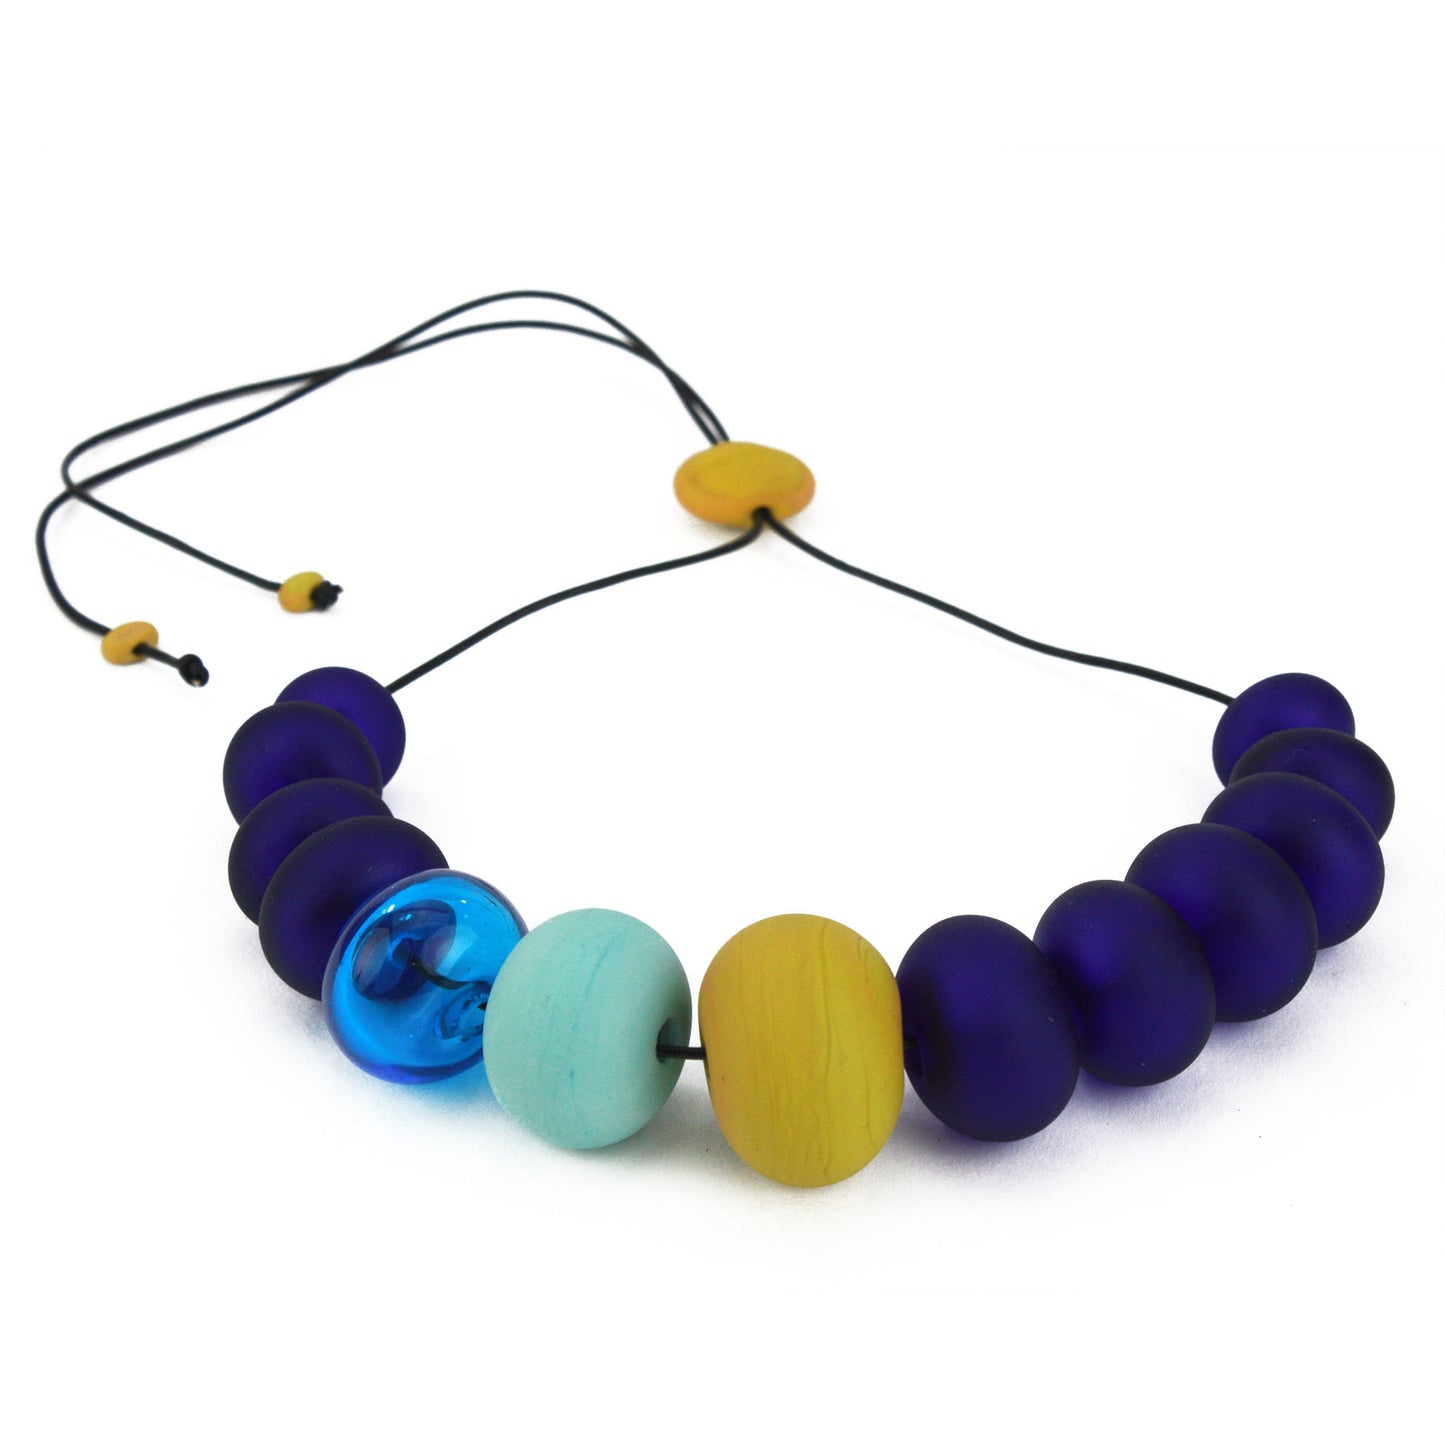 13 bead Bubble necklace - cobalt, yellow and turquoise